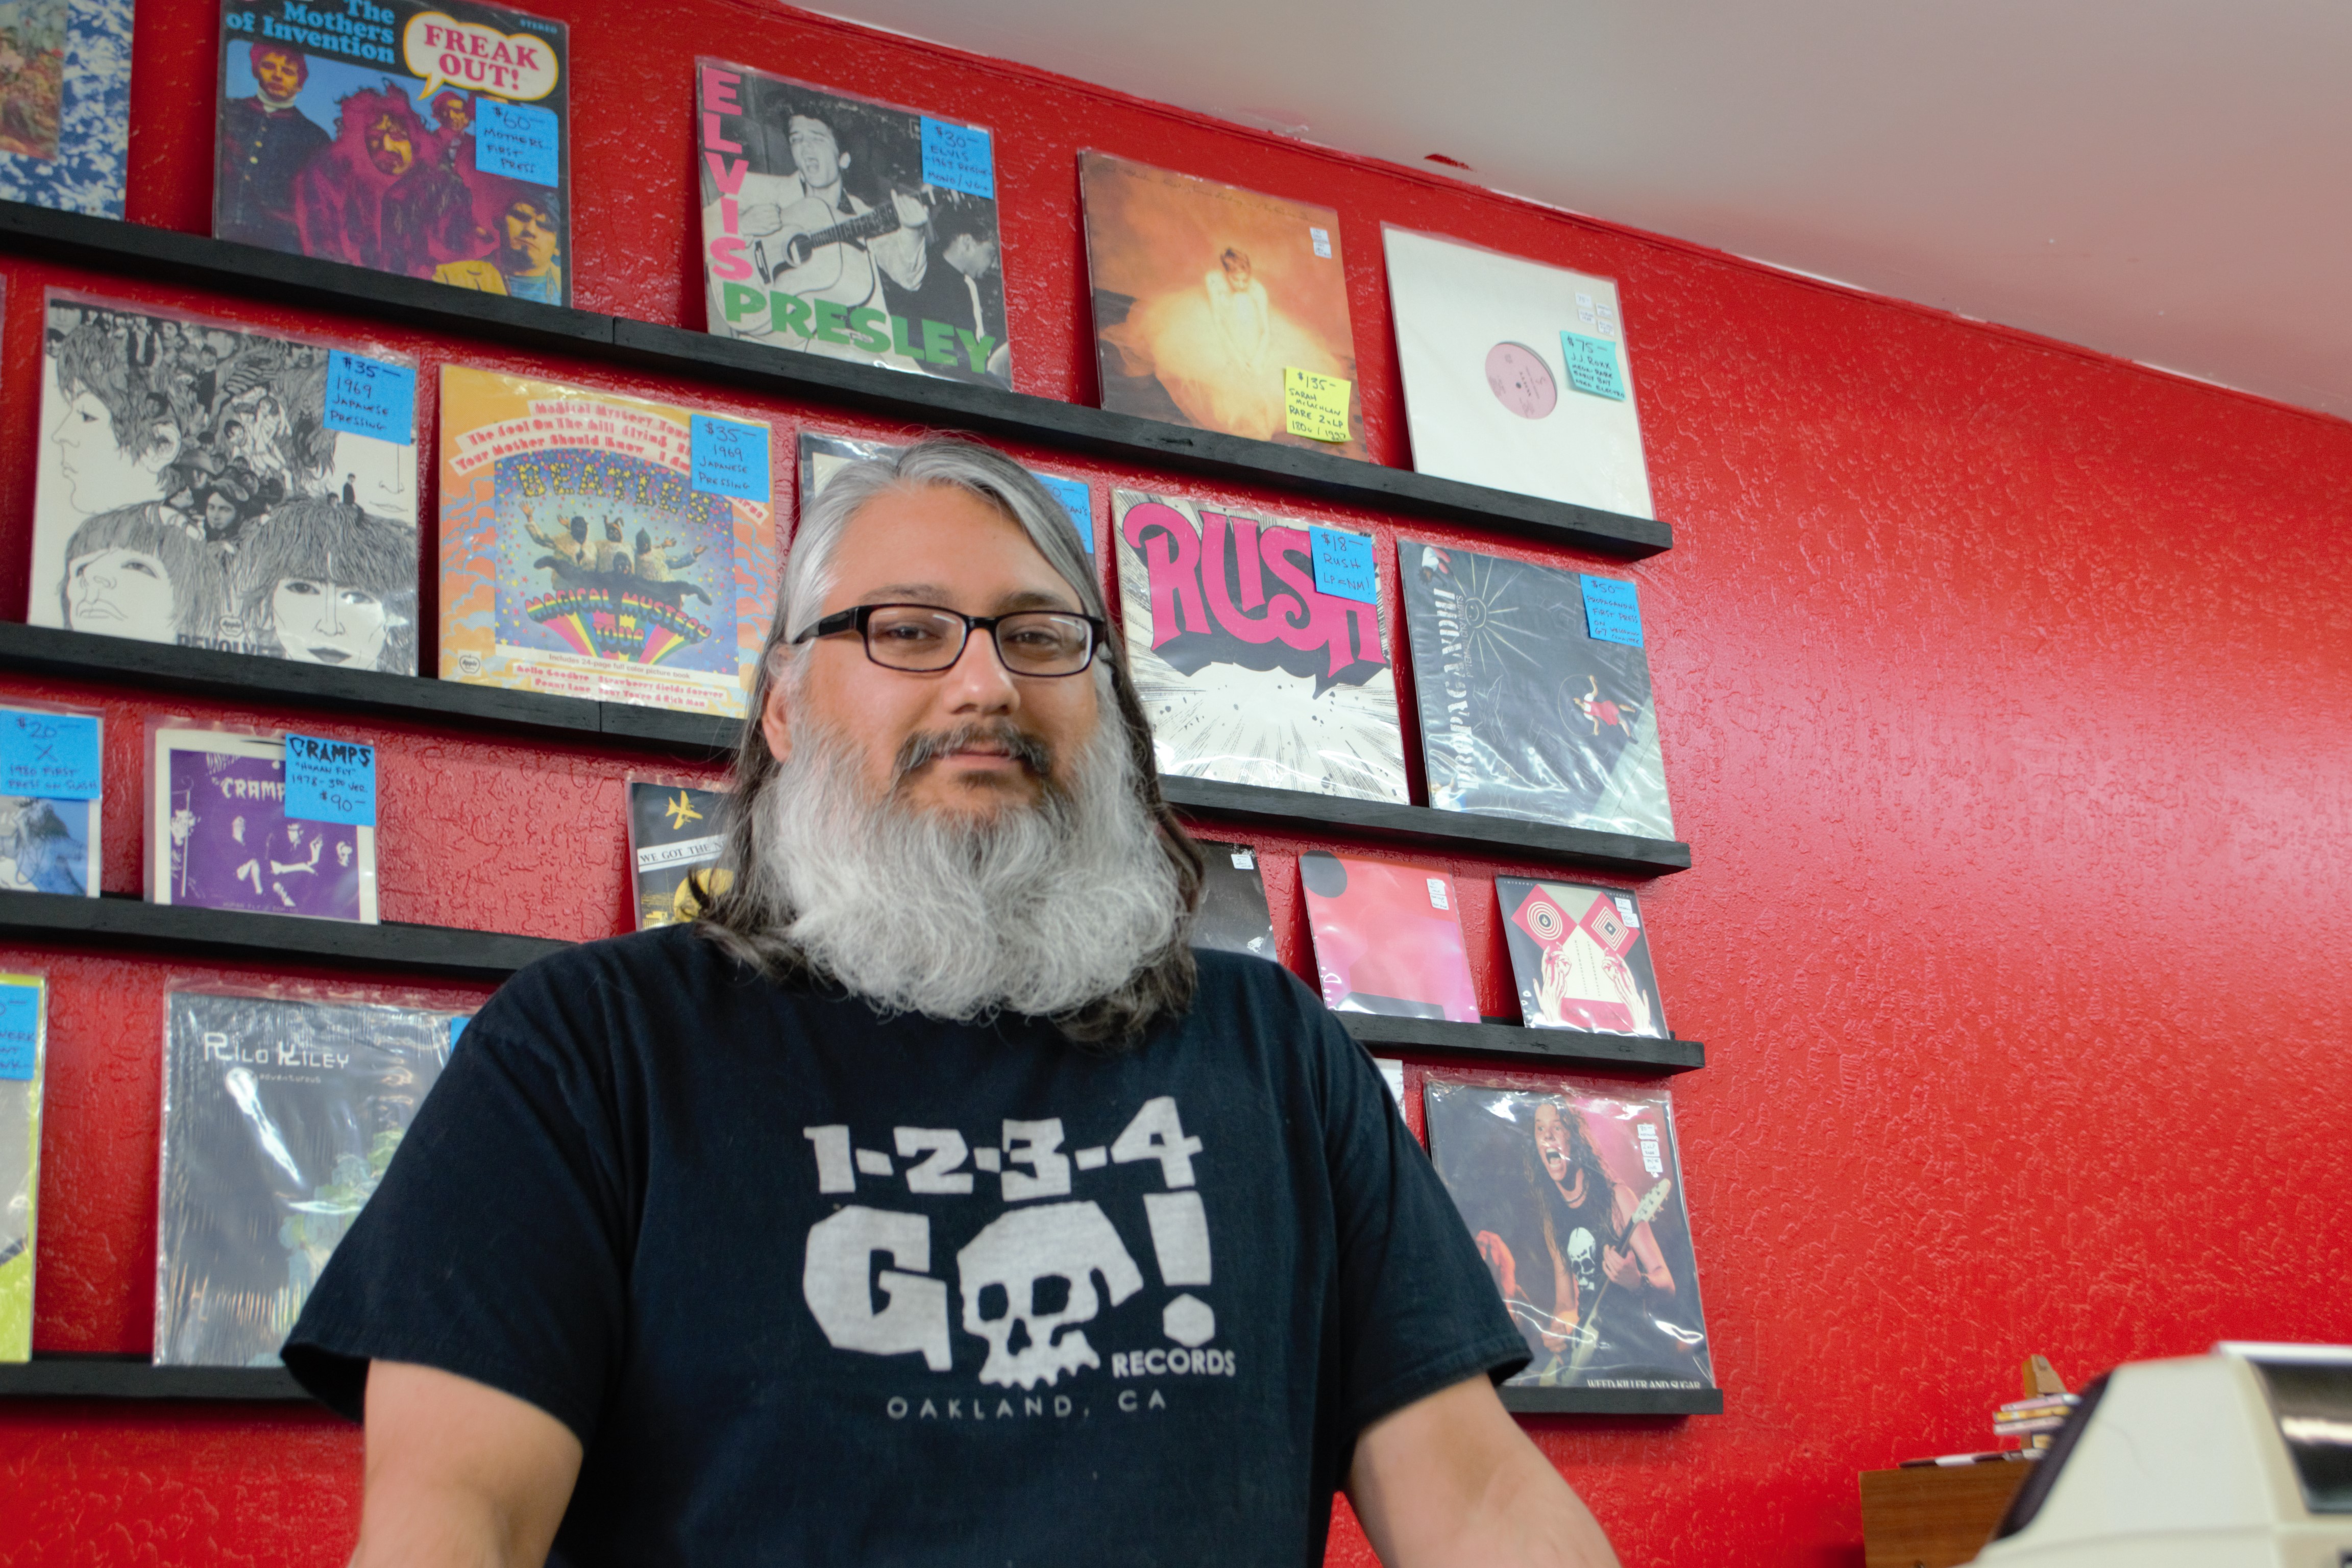 reno-record-store-owner